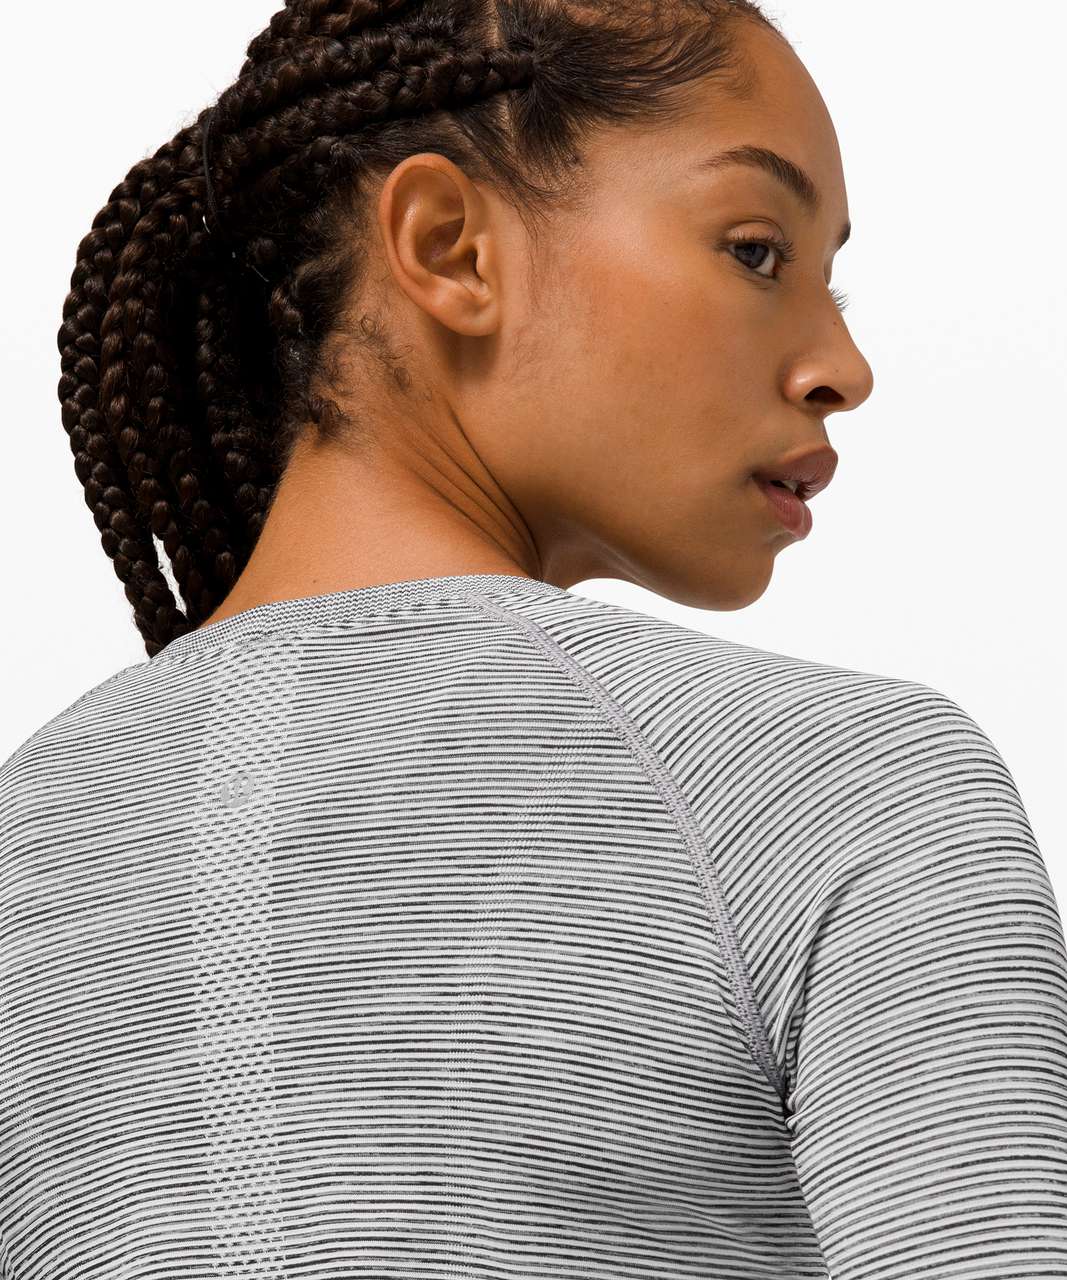 Lululemon Swiftly Tech Long Sleeve 2.0 - Wee Are From Space White